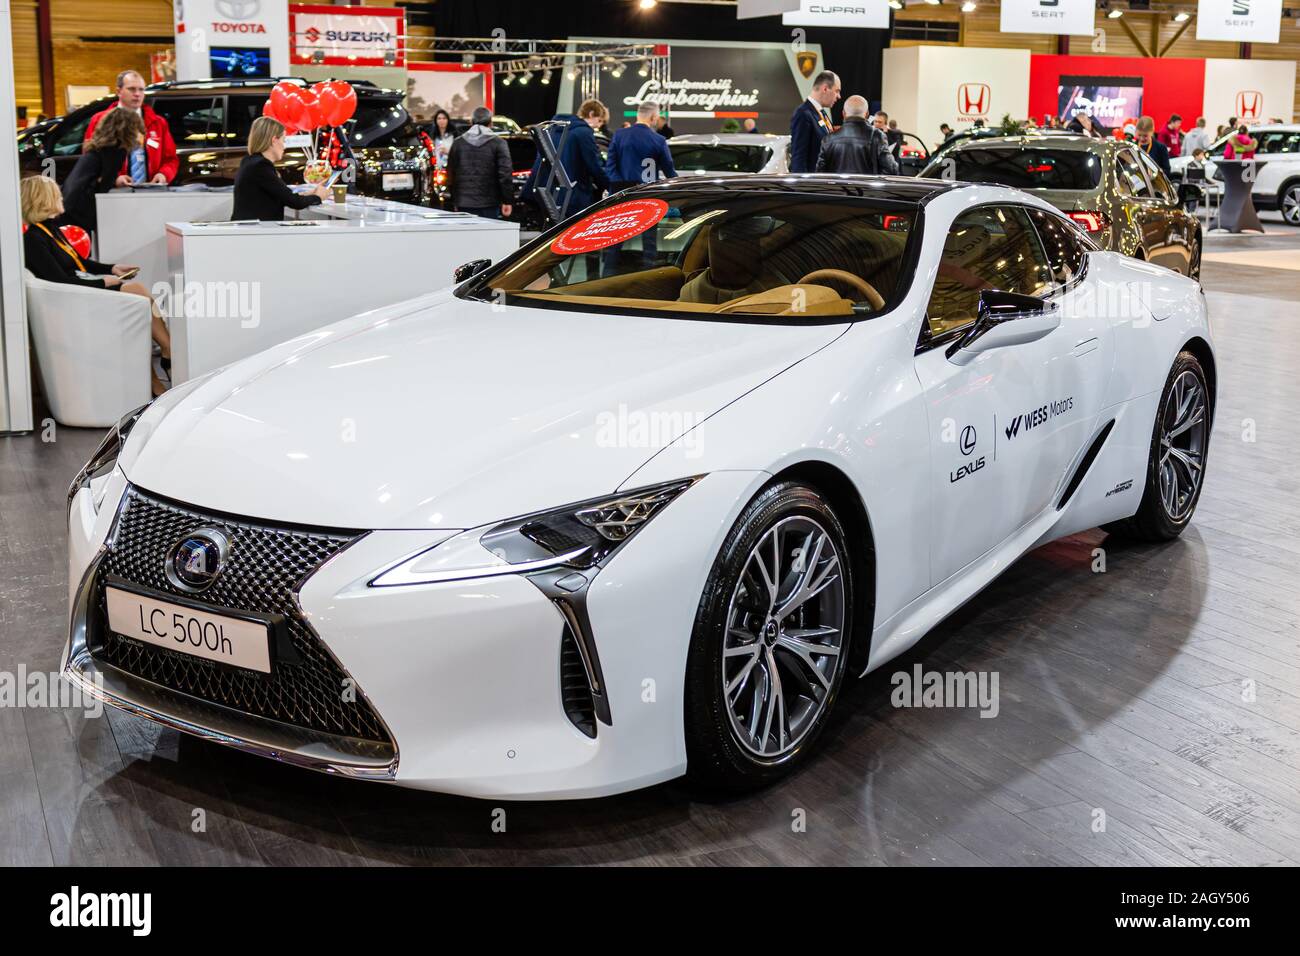 Riga, Latvia - April 12, 2019:  New, expensive luxury sports car in the Lexus LC 500h in the showroom - image Stock Photo